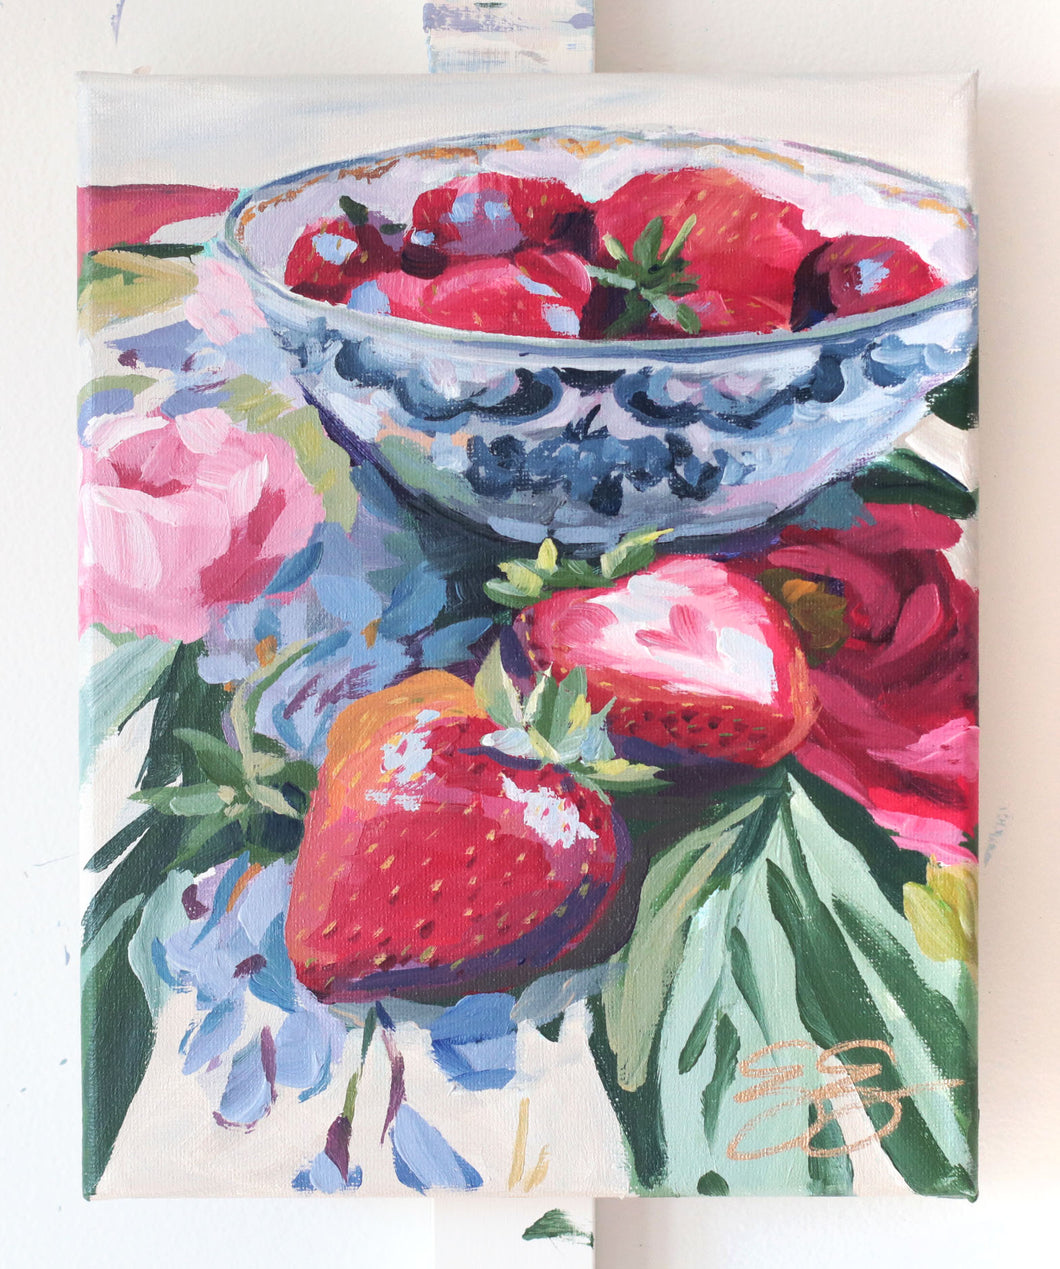 Still life painting of strawberries on floral fabric - 8 x 10